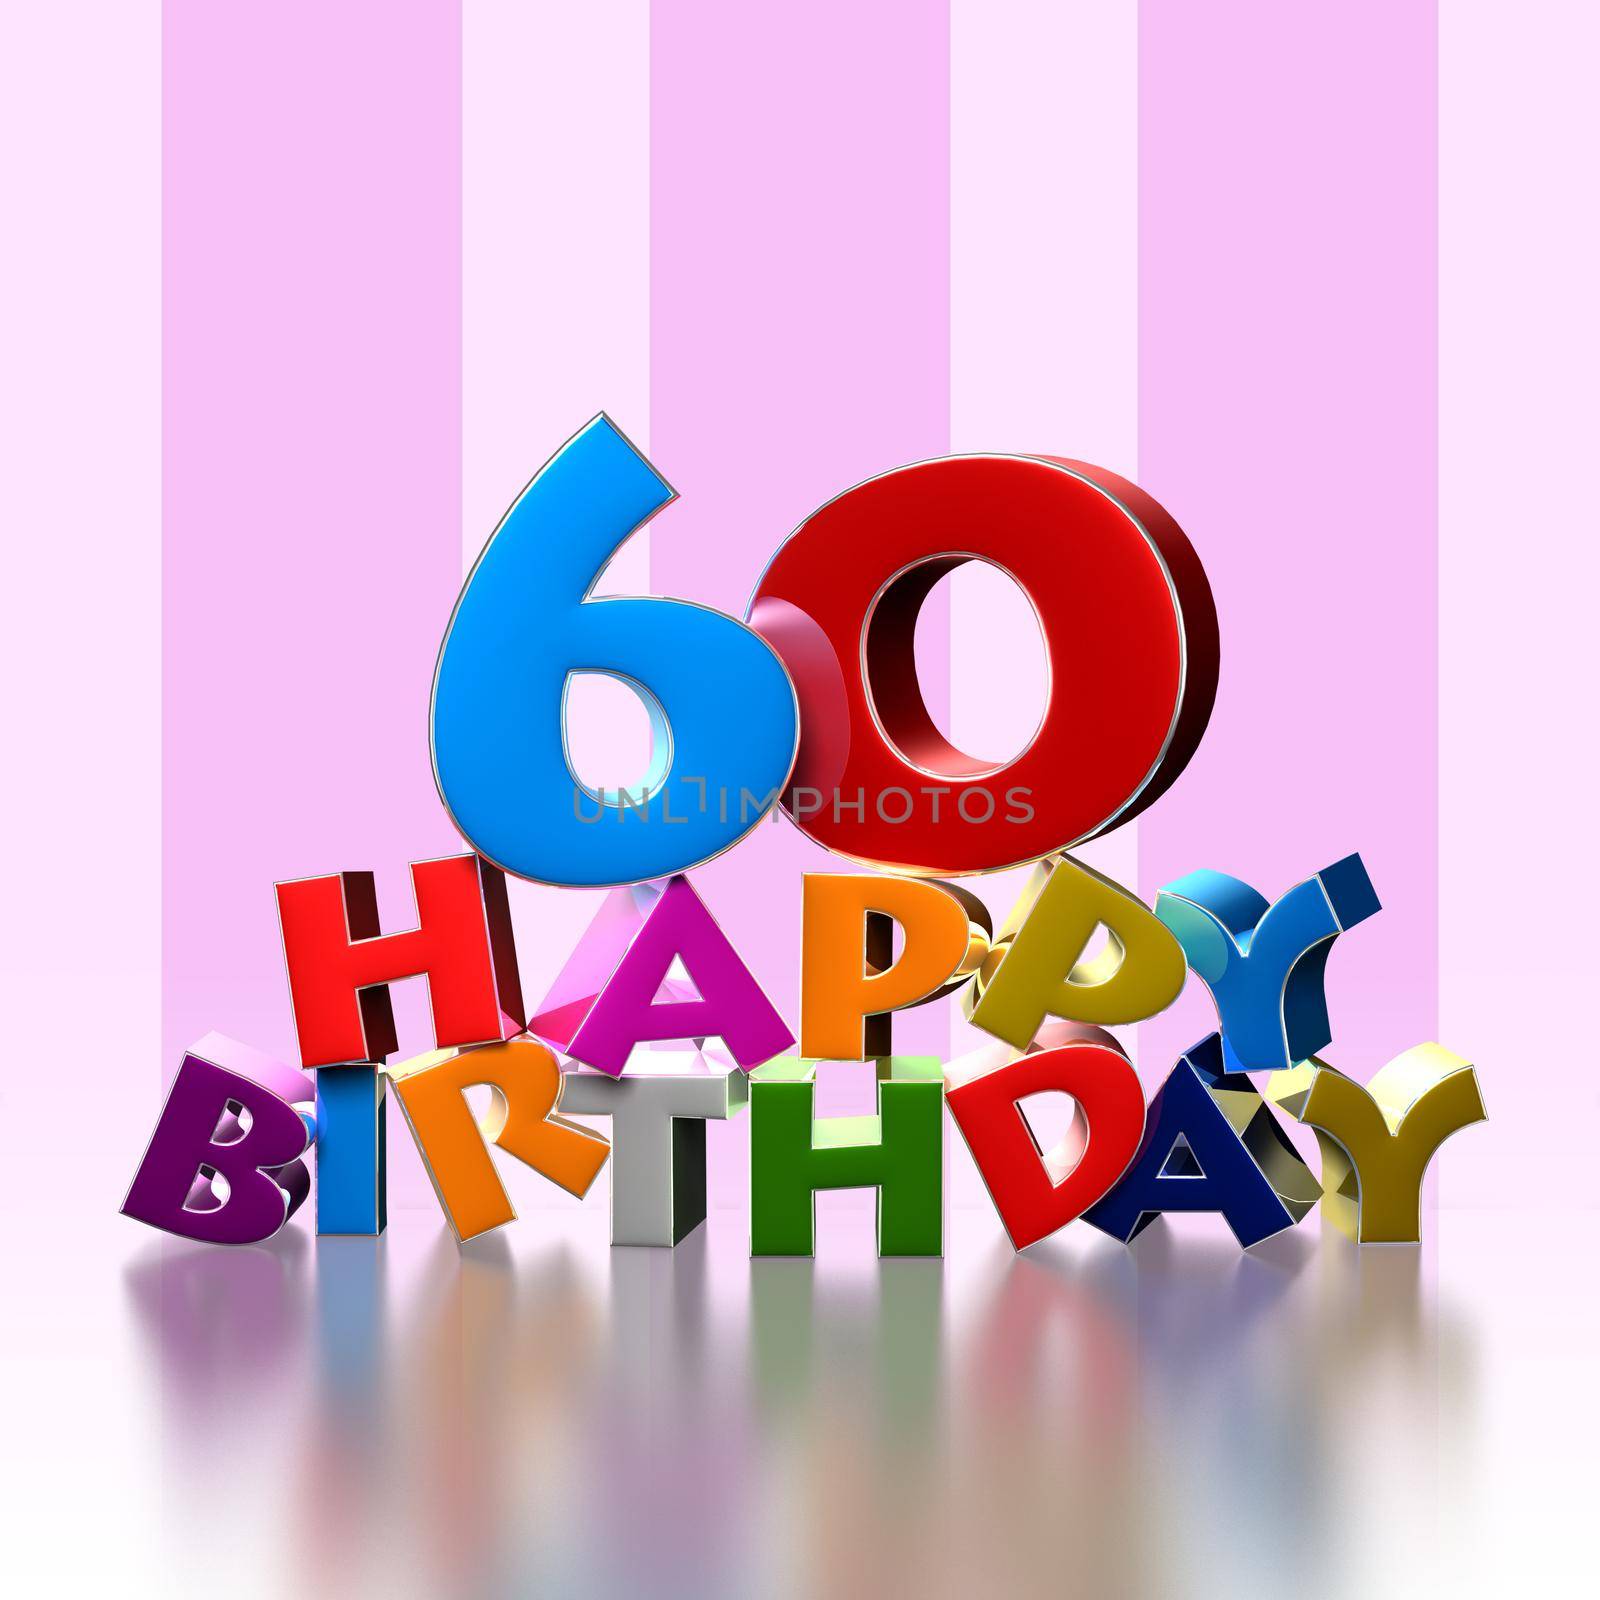 60 happy birthday 3D illustration on pink background.With clipping path.